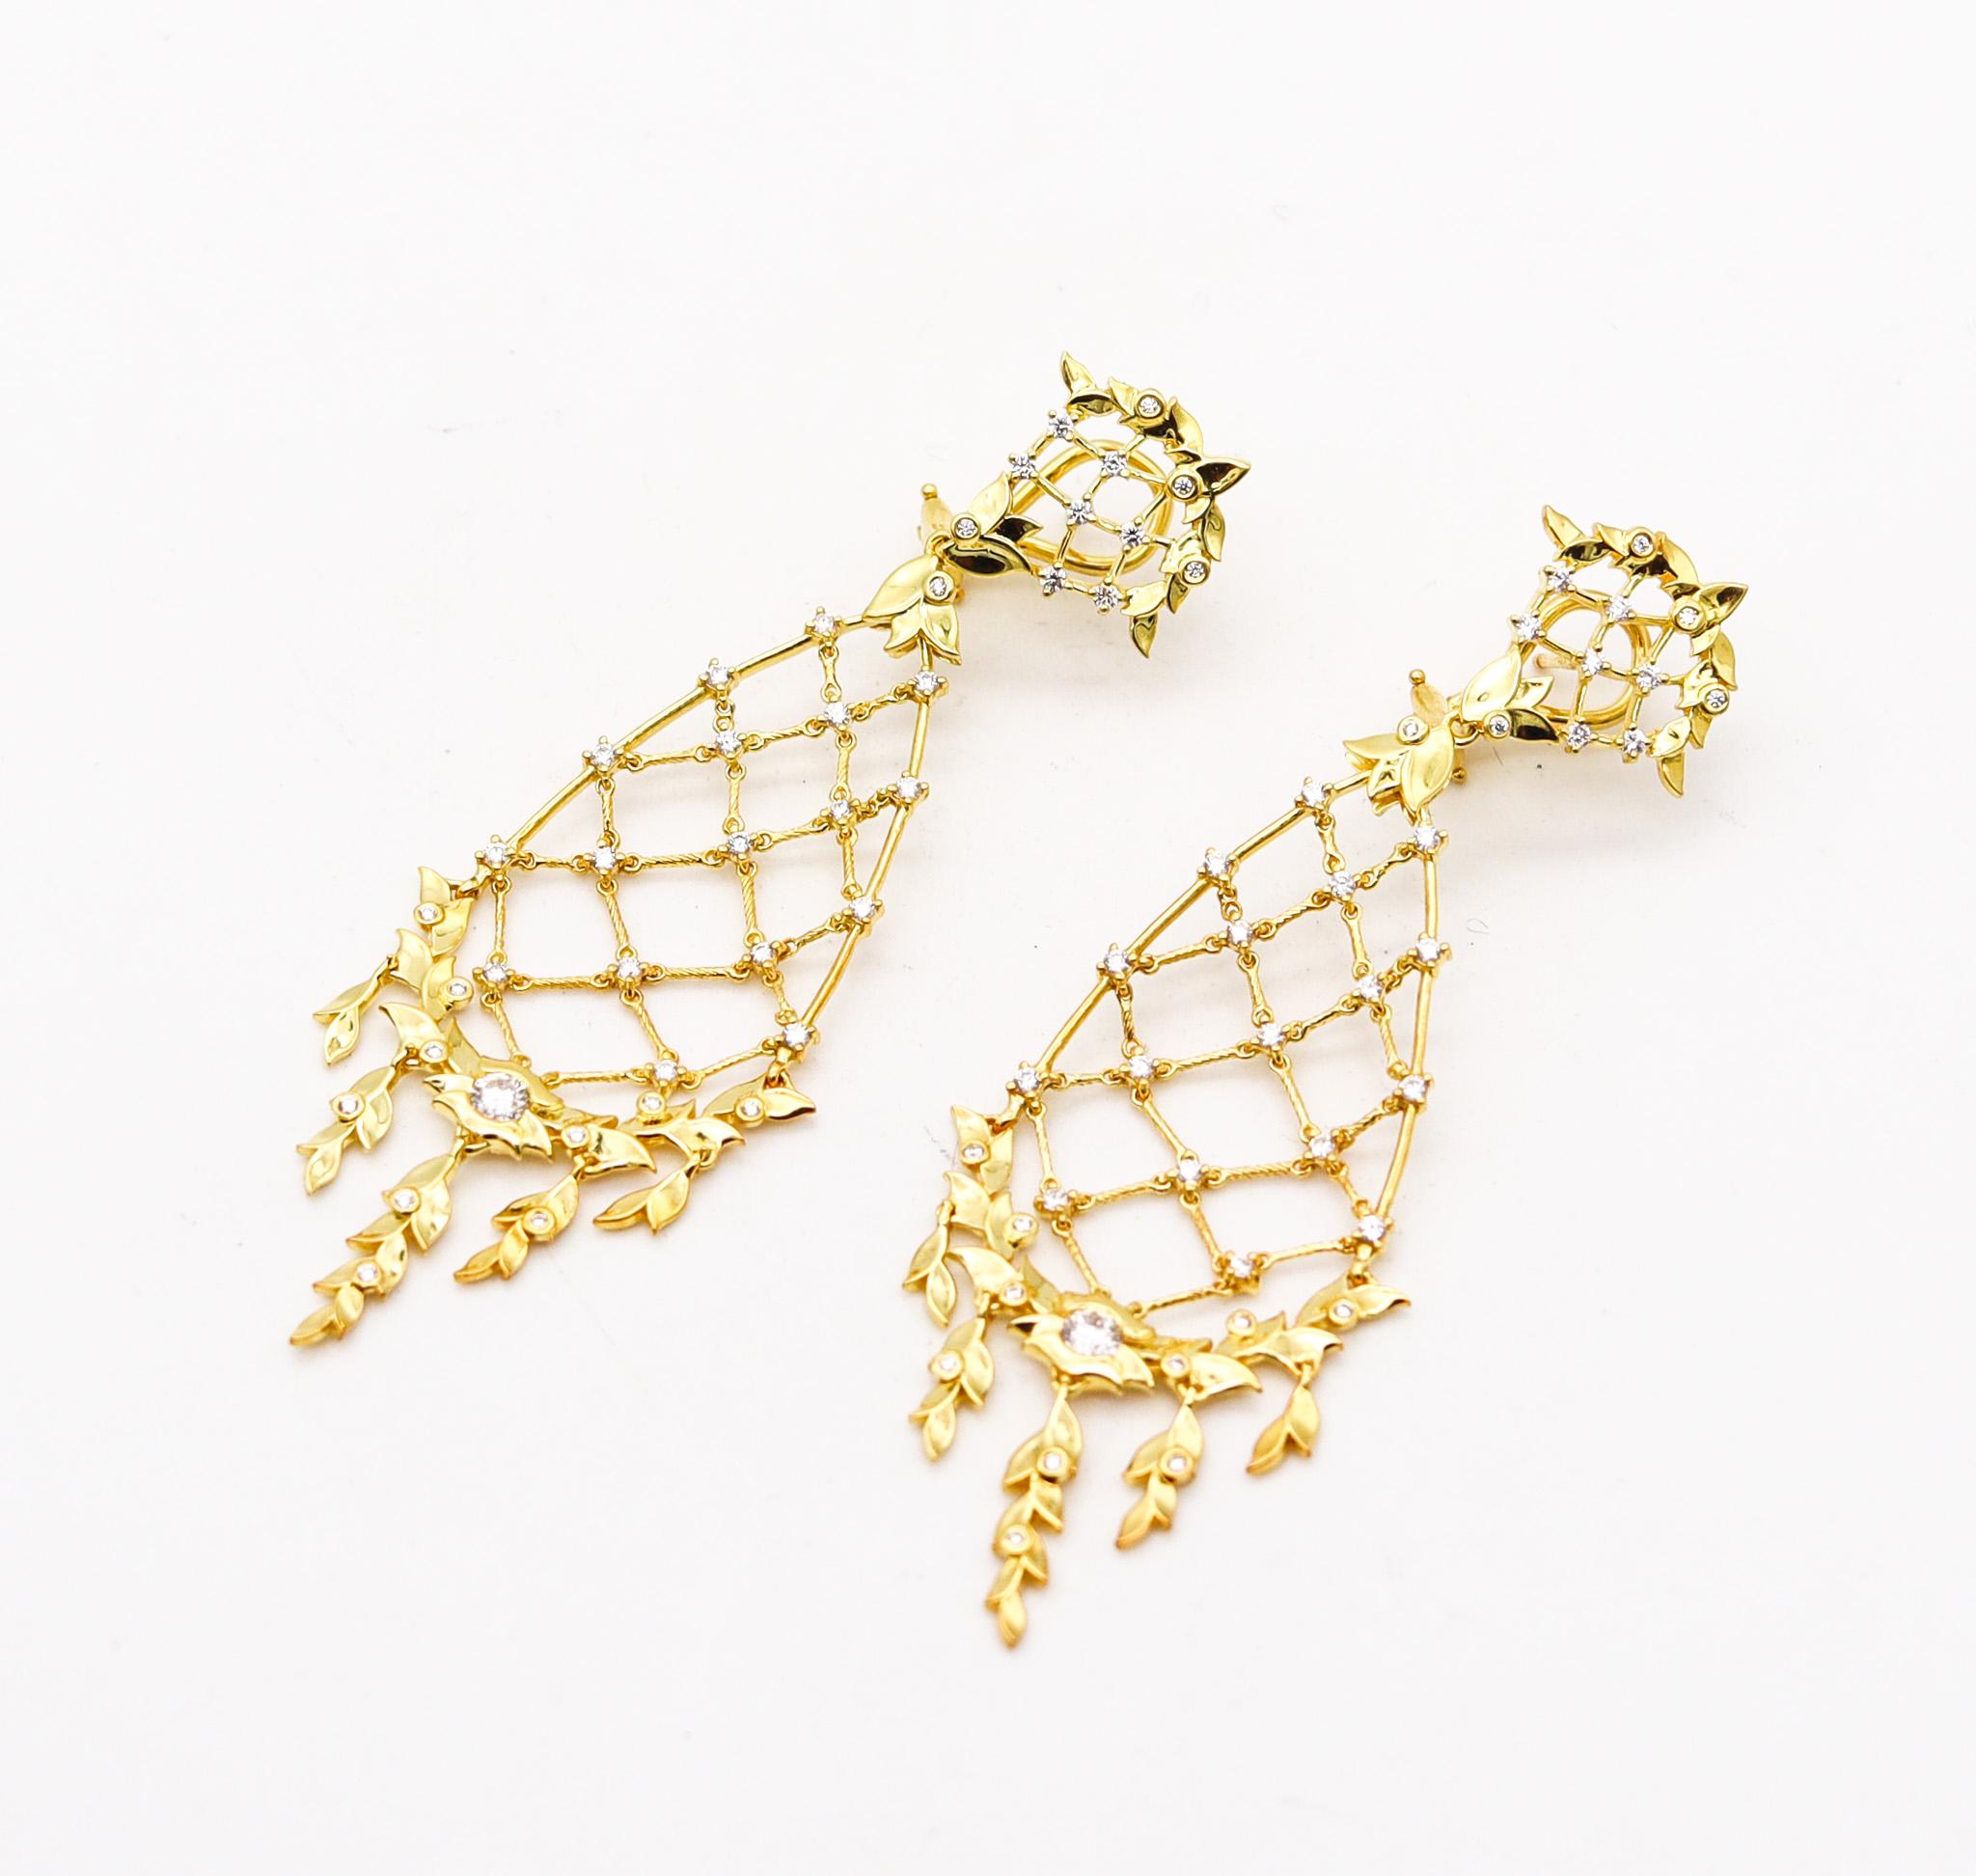 Dangle drop earrings designed by Paul Morelli.

Beautiful pair of dangle earrings, created in Philadelphia United States at the jewelry atelier of Paul Morelli. These gorgeous pair of earrings has been crafted with classic baroque-chandeliers